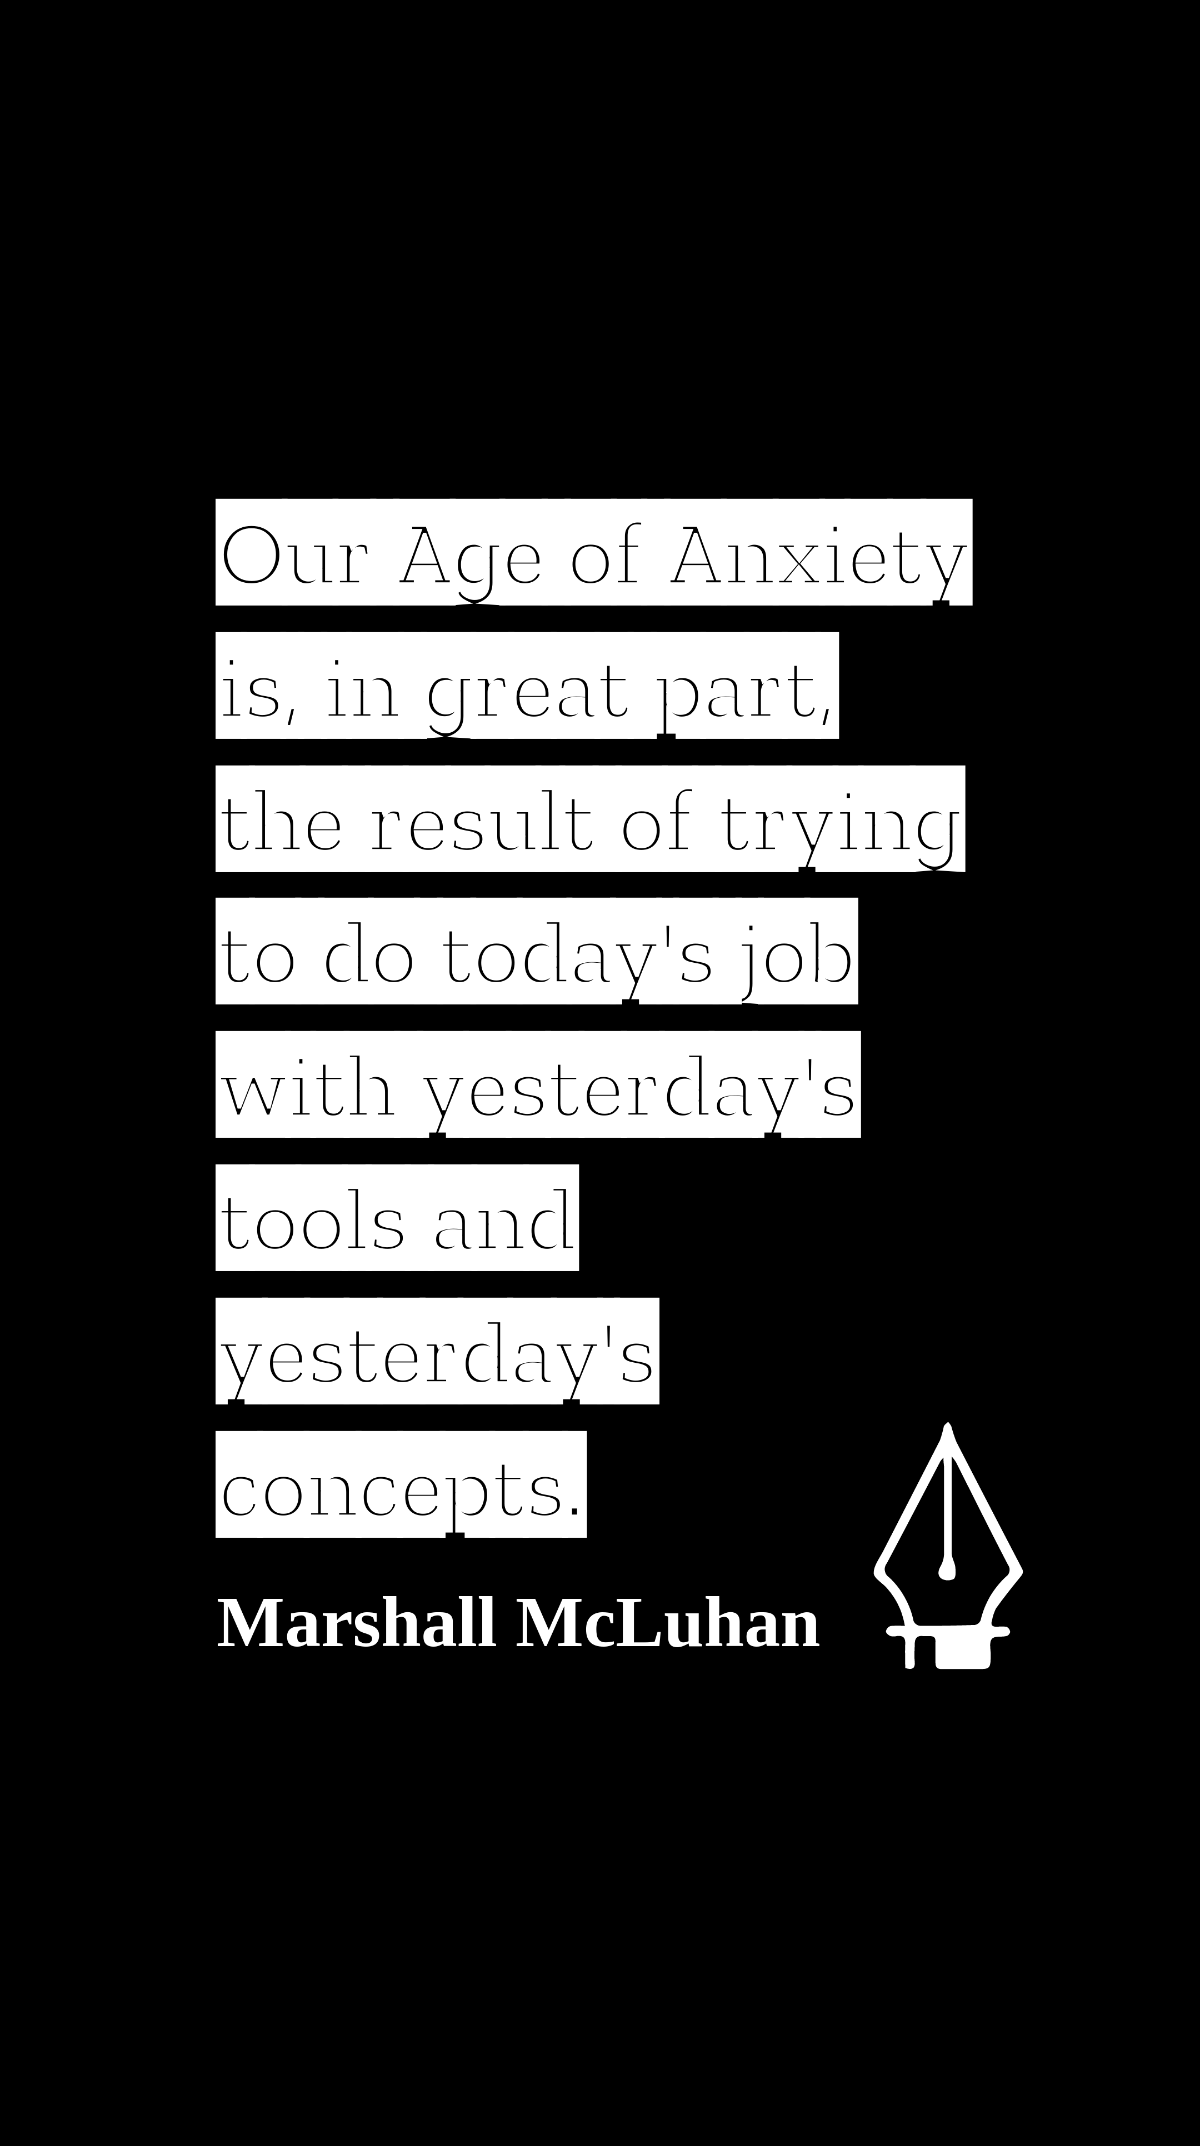 Free Marshall McLuhan - Our Age of Anxiety is, in great part, the result of trying to do today's job with yesterday's tools and yesterday's concepts. Template